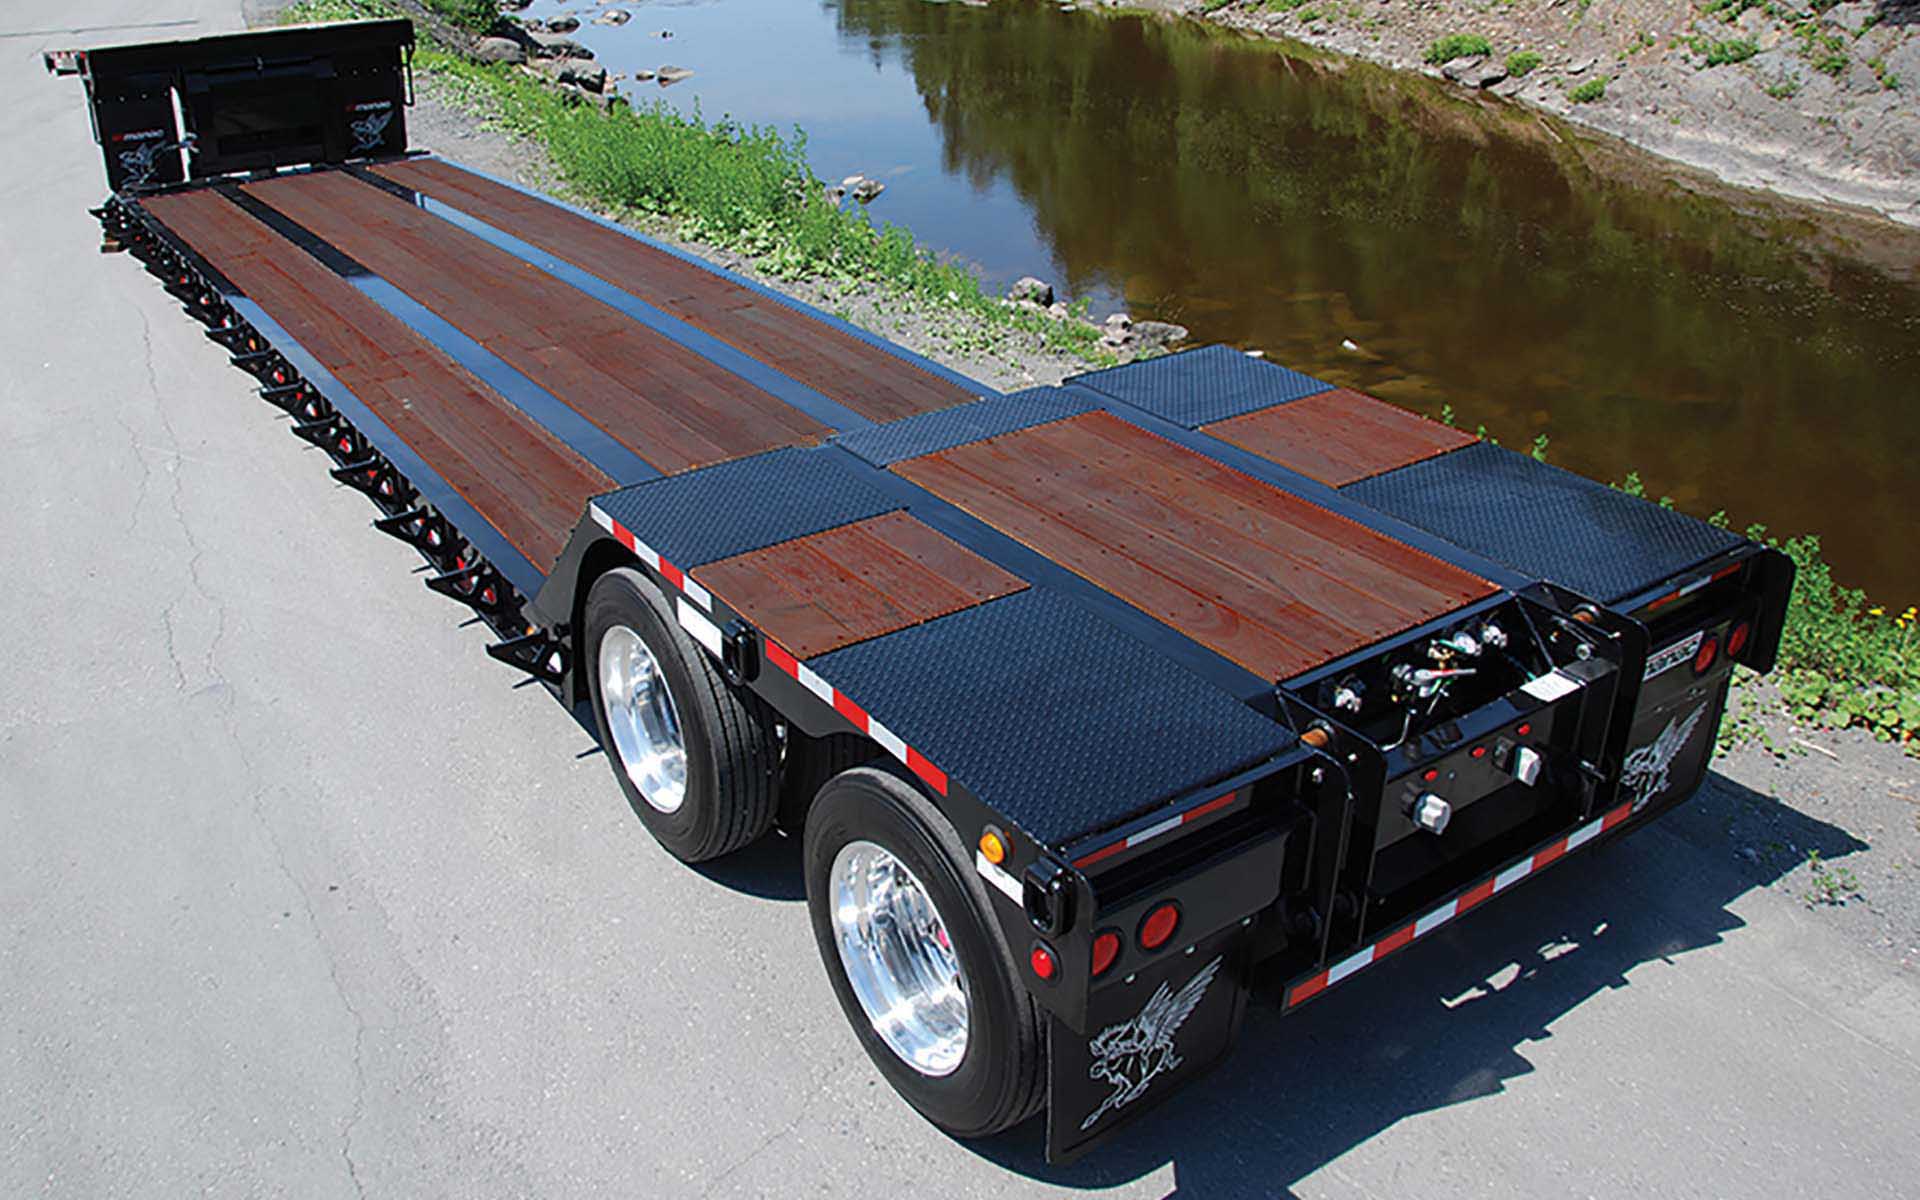 Manac Flatbed by River with APITONG OIL Exterior Oil Based Wood Stain